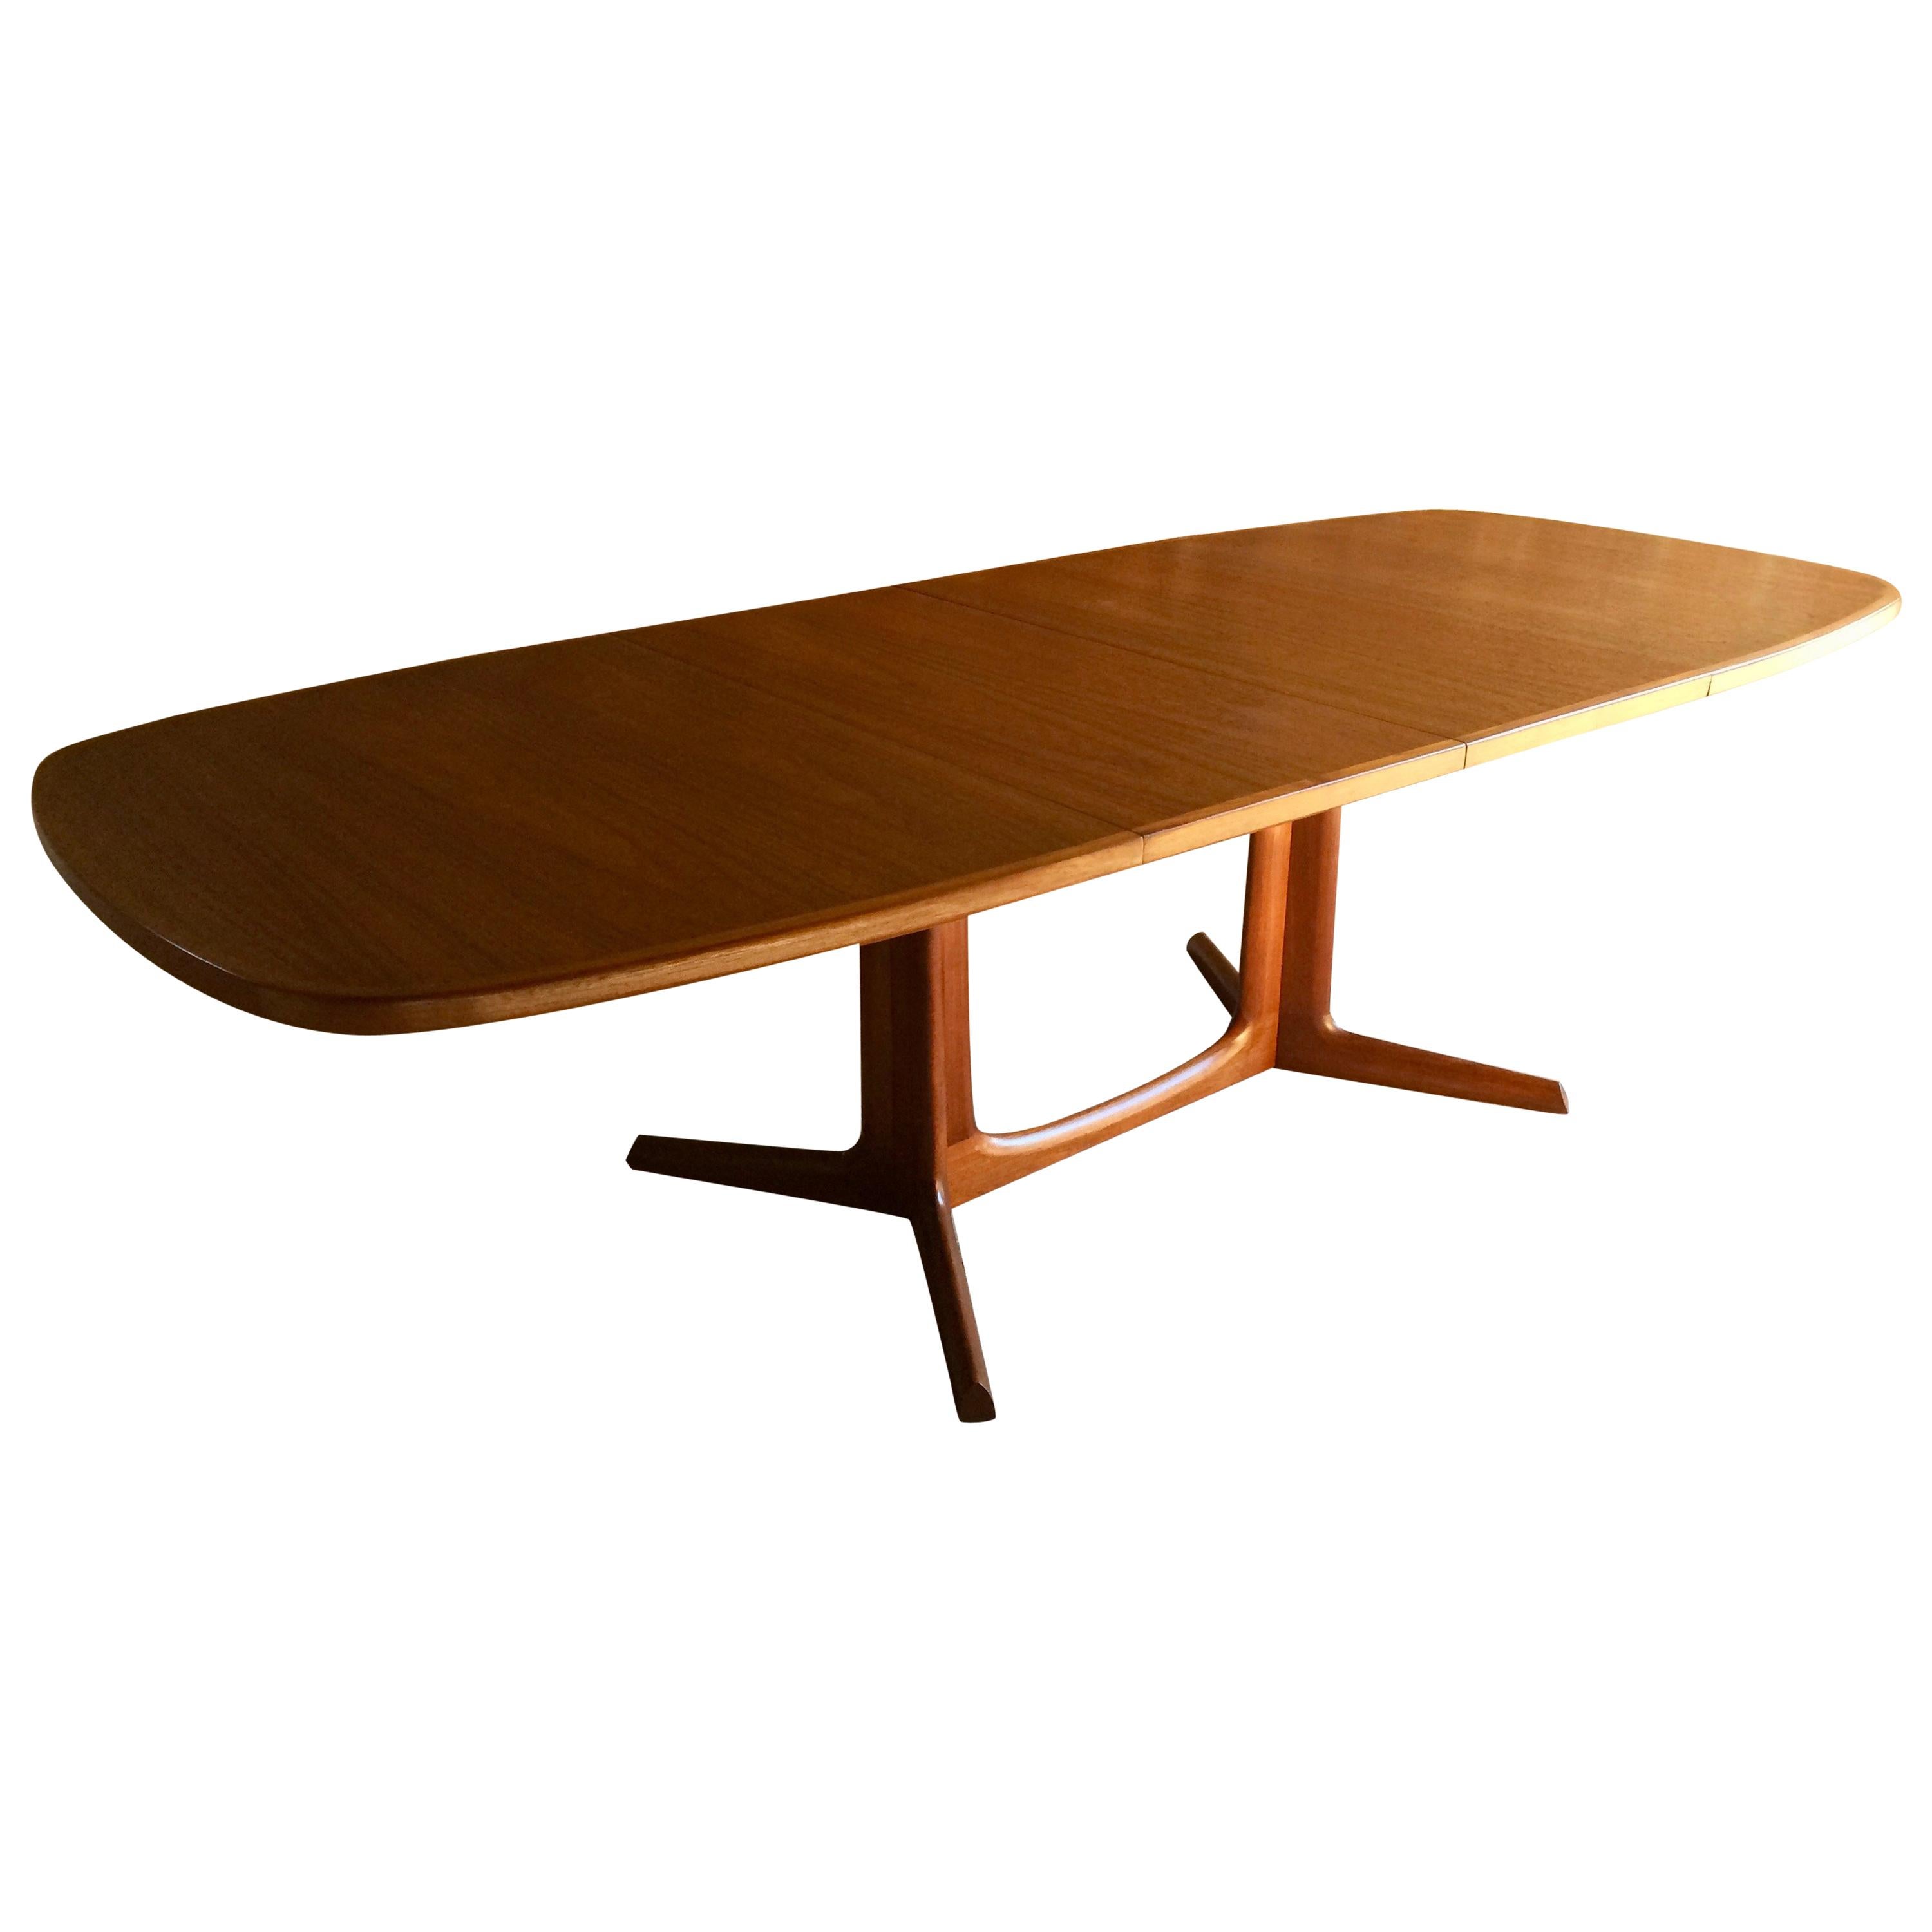 Danish Solid Teak Dining Table by Niels Otto Moller for Gudme Mobelfabrik, 1960s